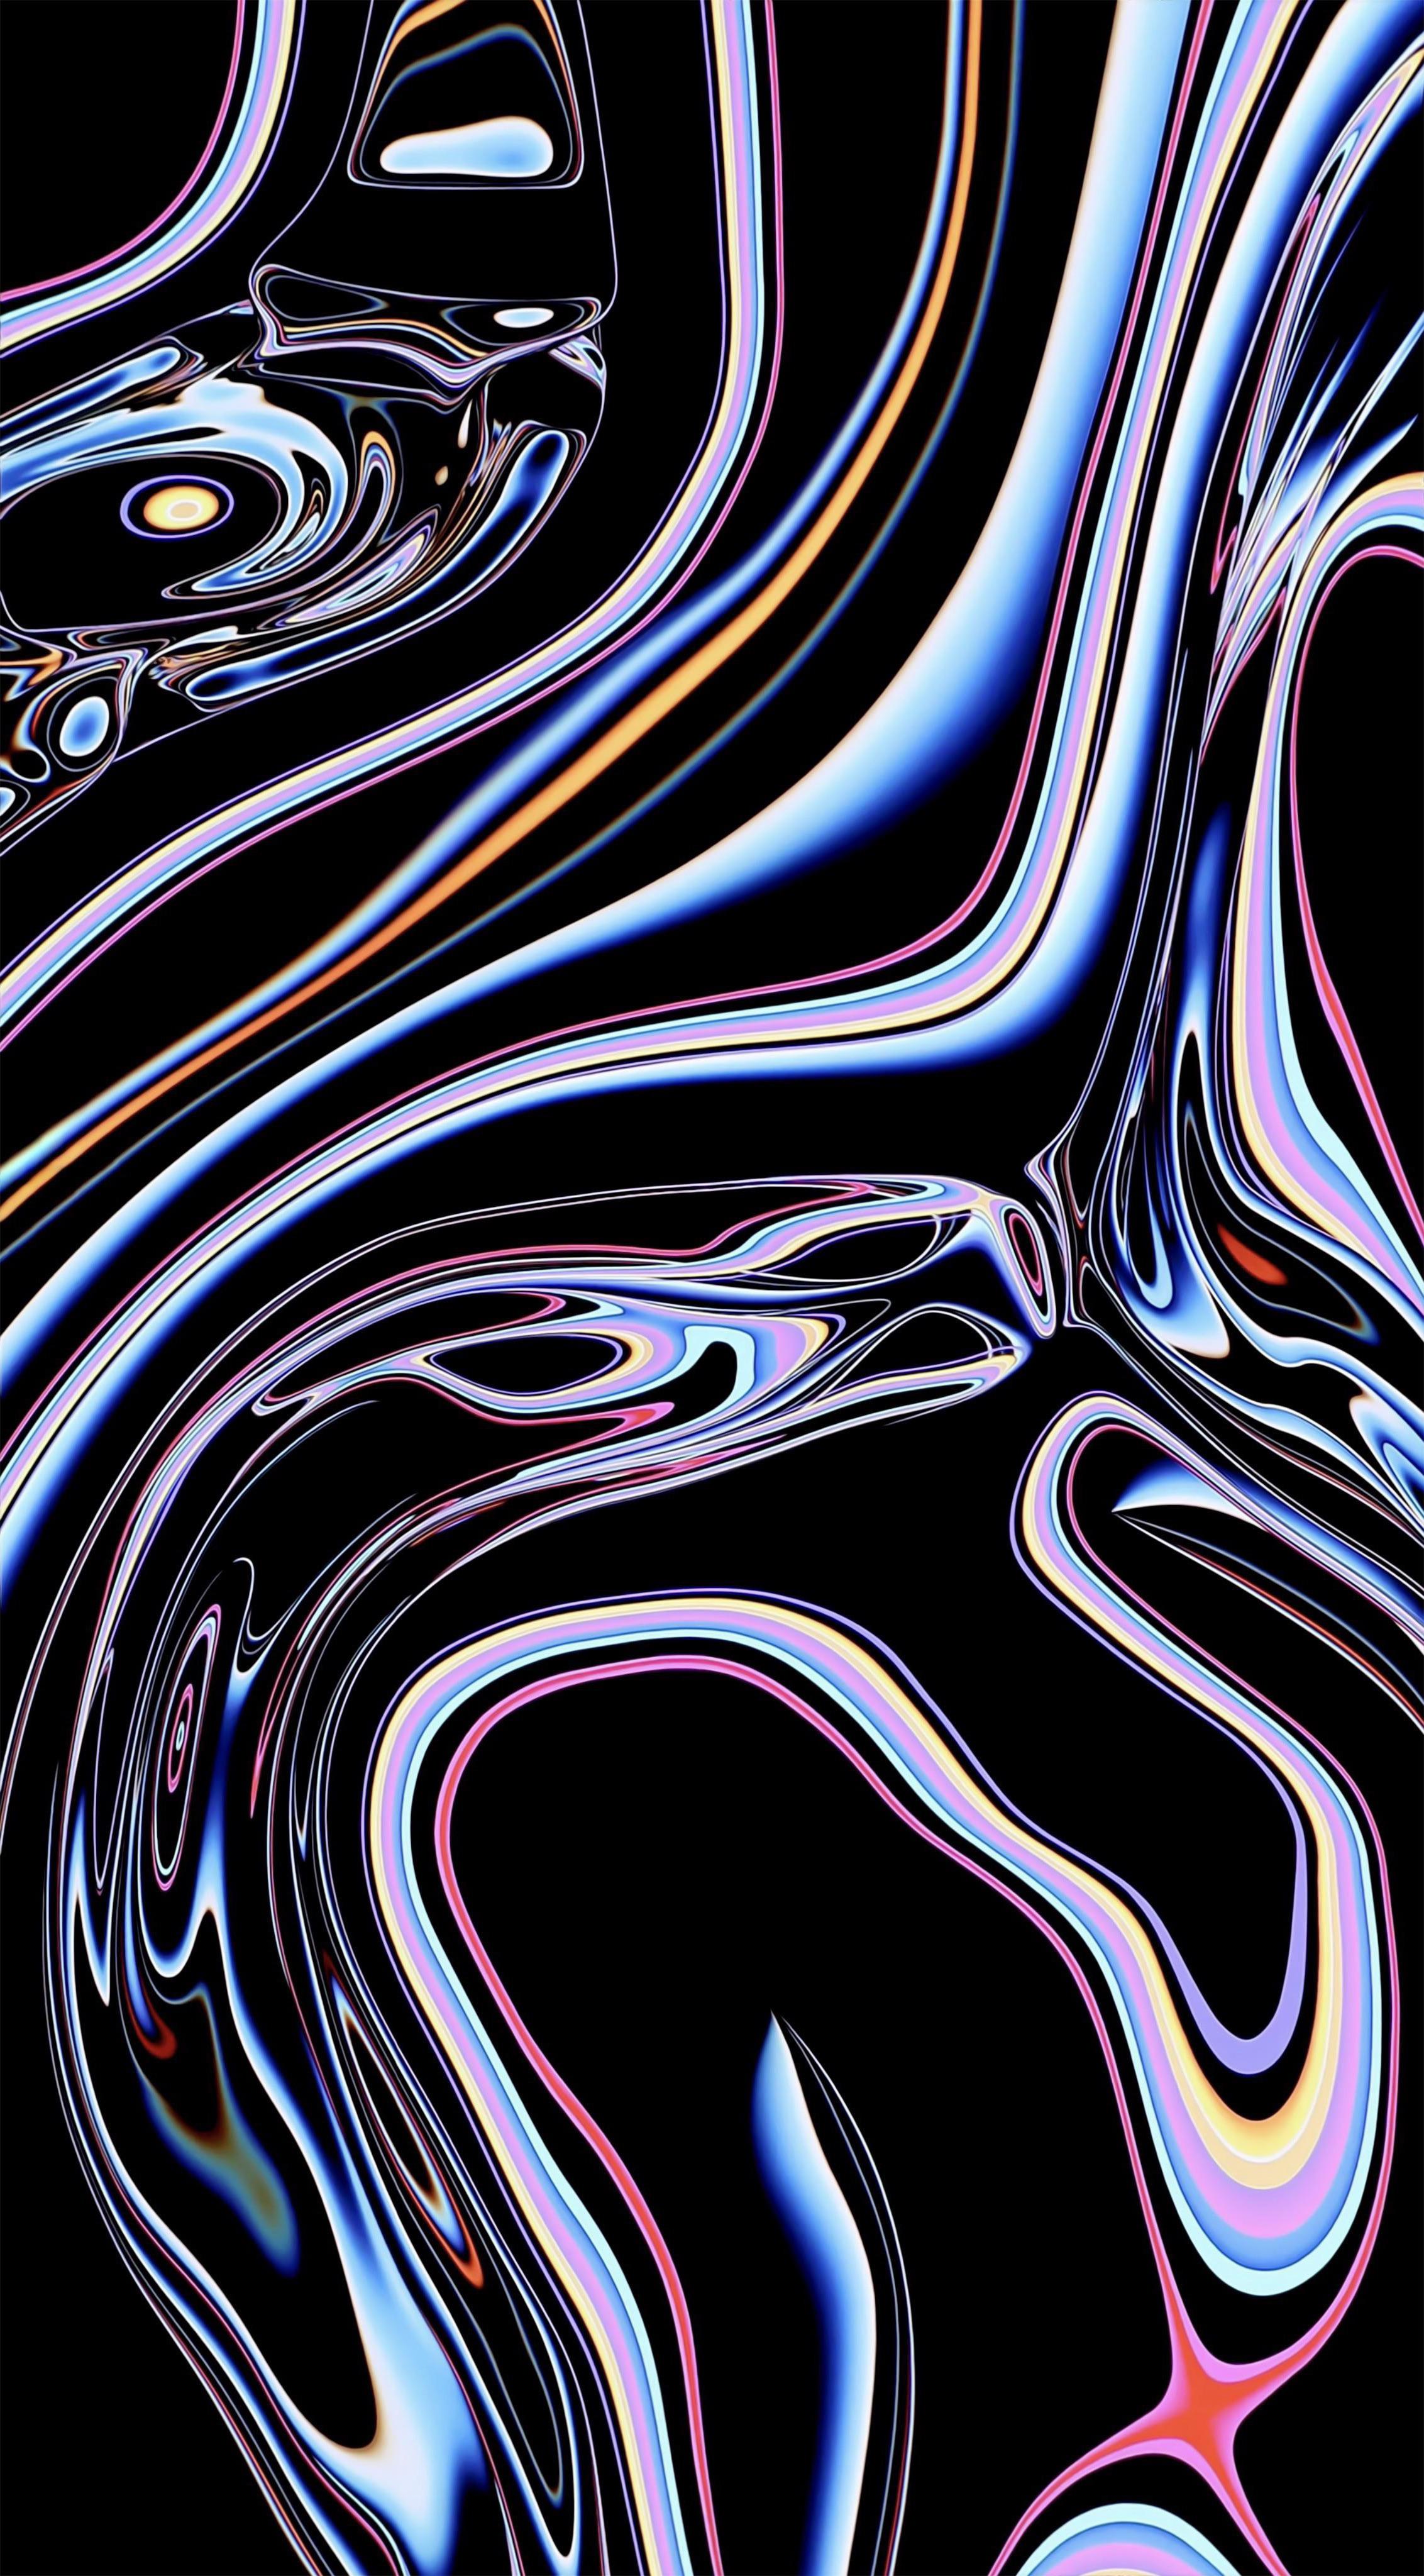 New Apple Pro Display wallpaper, looks great on any OLED device : iphonewallpapers